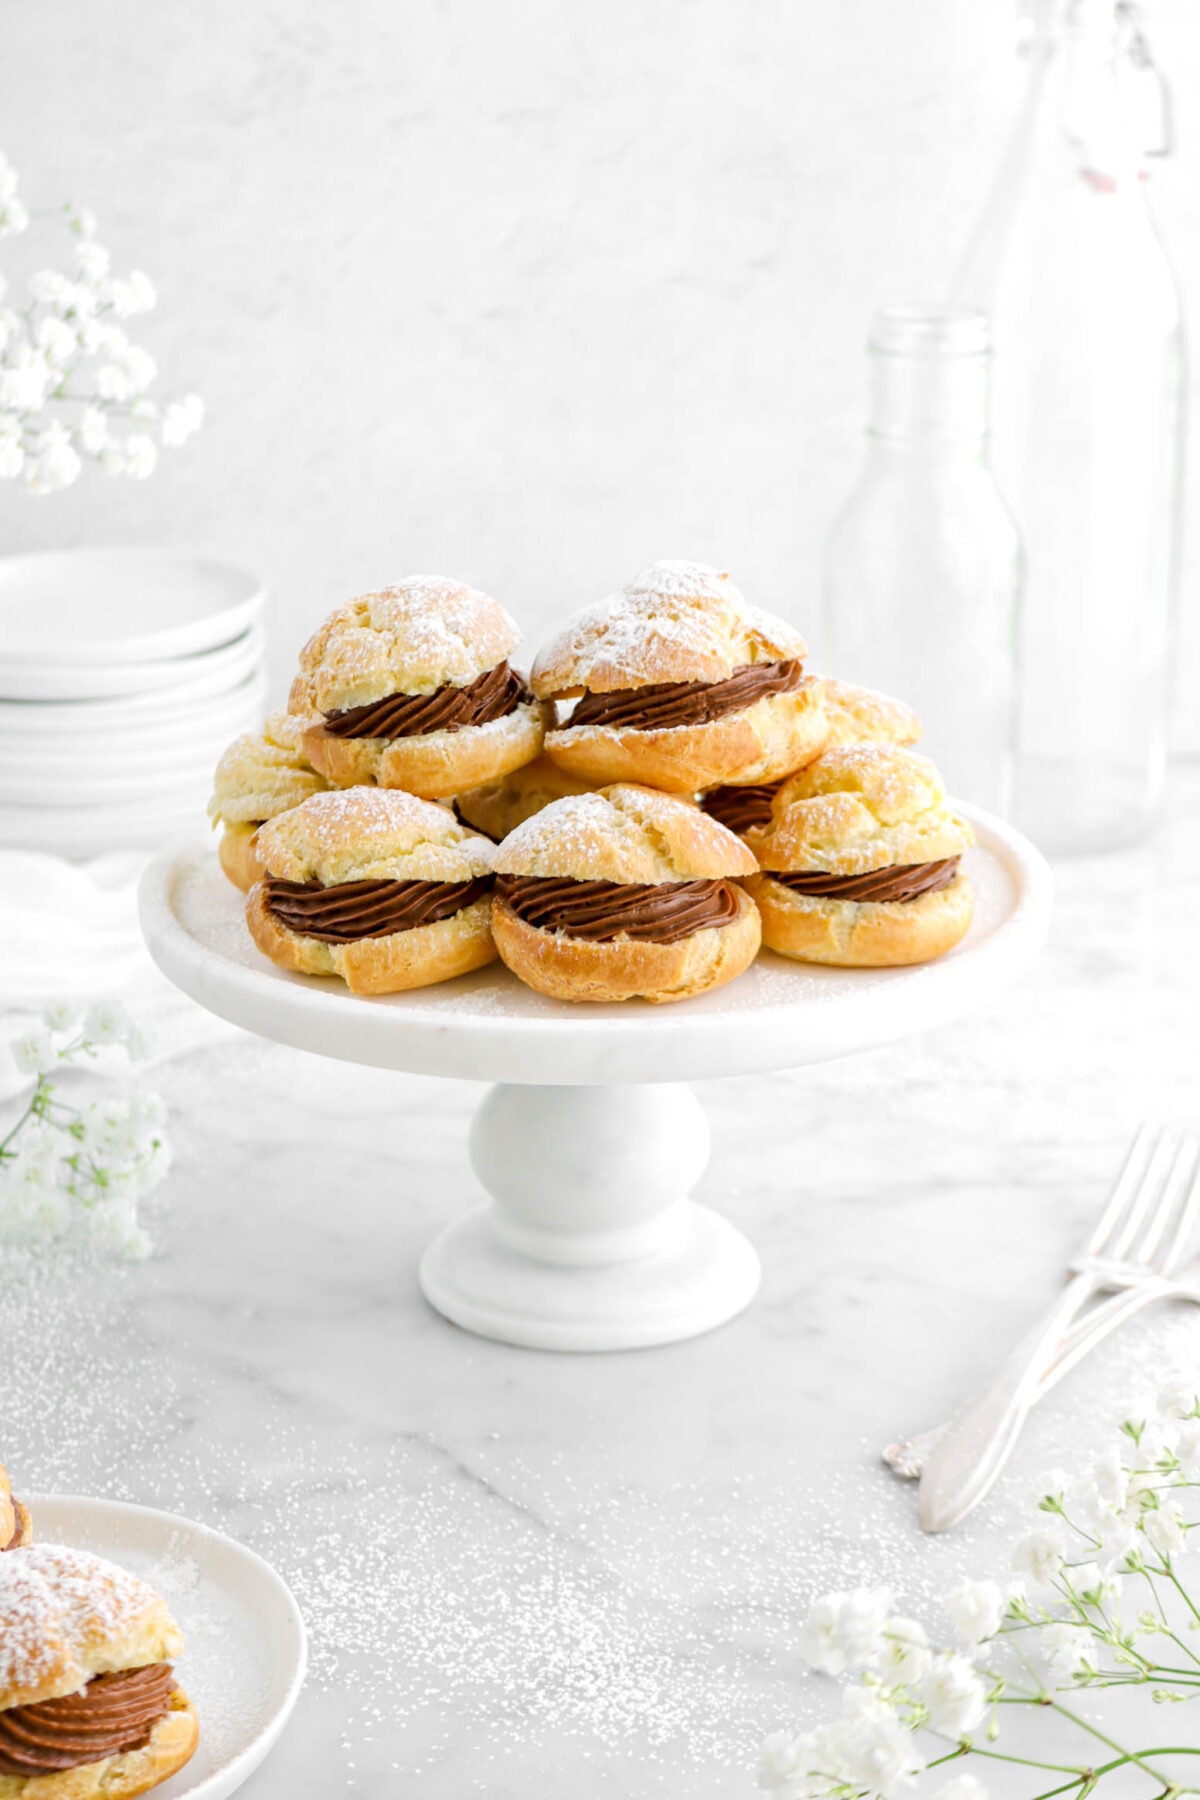 angled close up of cream puffs with flowers around, two forks beside, a stack of plates behind, and empty glasses